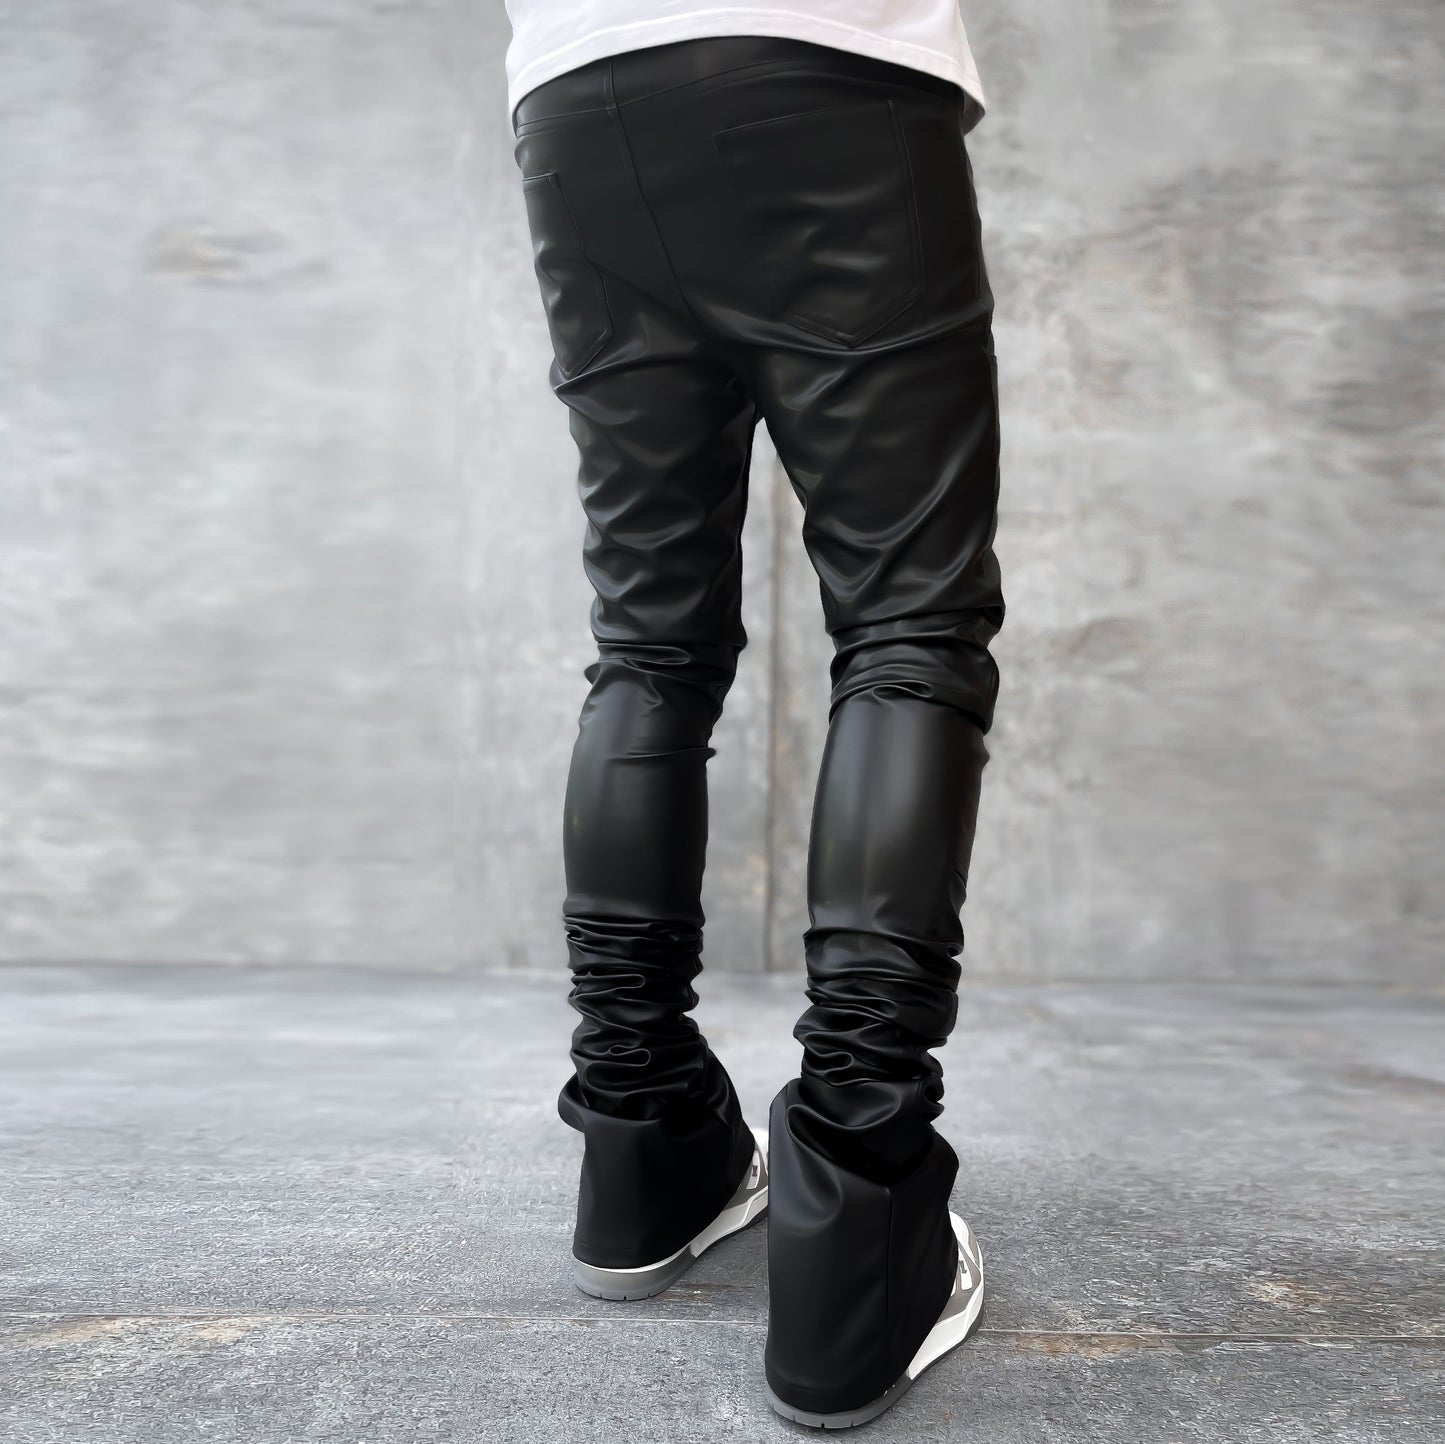 Retro trendy embroidered street leather trousers